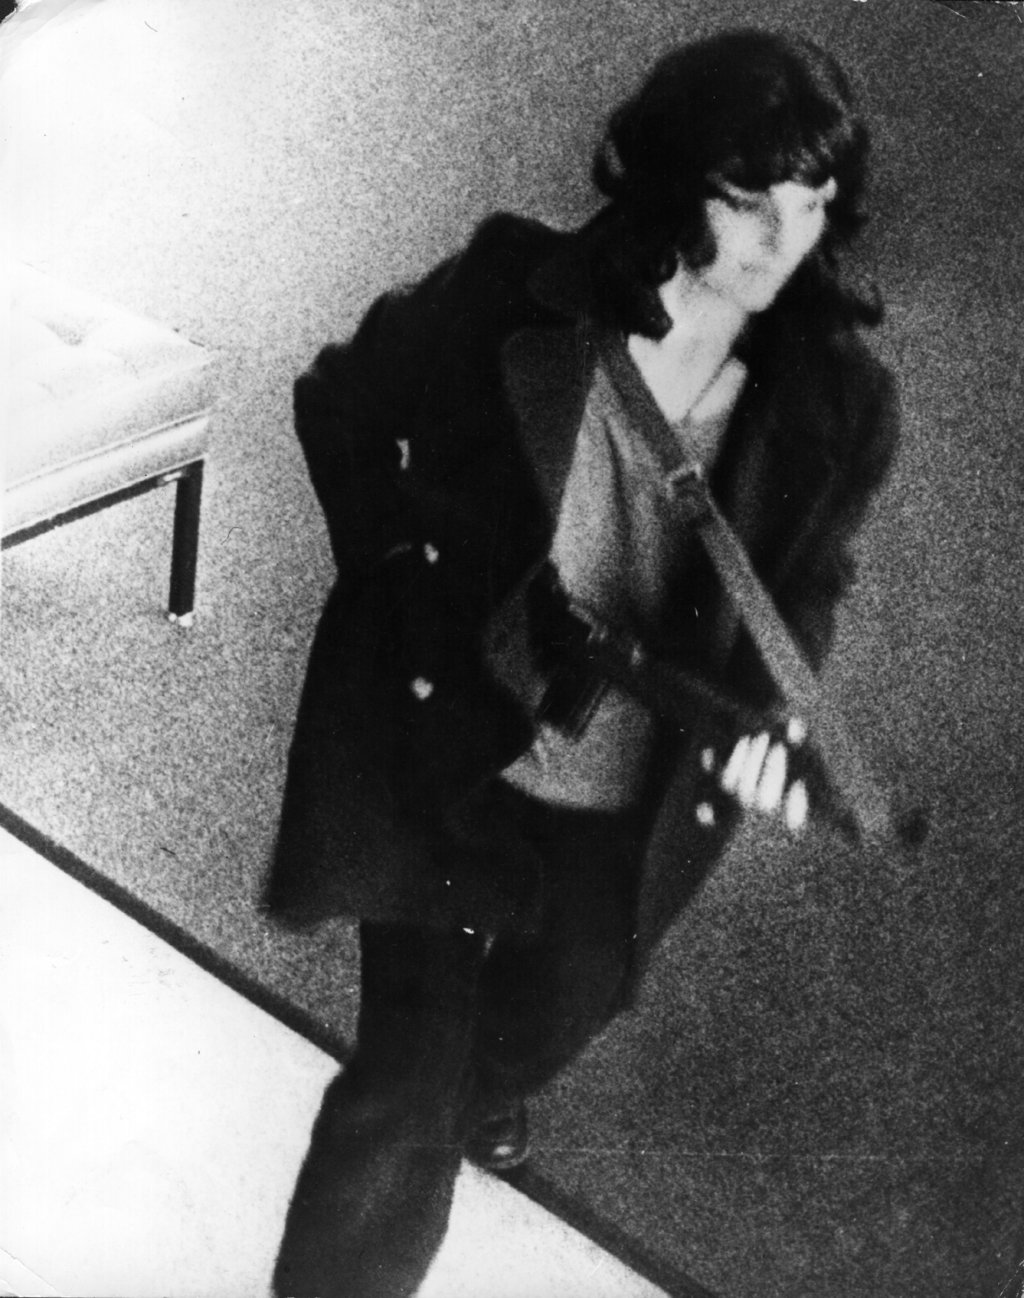 Patty Hearst Robbing the Sunset District branch of the Hibernia Bank in San Francisco at 9:40 A.M. April 15, 1974. Her and the Symbionese Liberation Army (S.L.A.) were in the bank for 4min.

Patricia Hearst Shaw, is the granddaughter of American publishing magnate William Randolph Hearst. She became nationally known for events following her 1974 kidnapping while she was a 19-year-old student living in Berkeley, California. Hearst was abducted by a left-wing terrorist group known as the Symbionese Liberation Army. After being isolated and threatened with death, she became supportive of their cause, making propaganda announcements for them and taking part in illegal activities. Hearst was found 19 months after her kidnapping, by which time she was a fugitive wanted for serious crimes. She was held in custody, despite speculation that her family’s resources would prevent her spending time in jail. At her trial, the prosecution suggested that she had joined the Symbionese Liberation Army of her own volition, and sexual activities between her and SLA members had not amounted to rape. She was found guilty of bank robbery. Hearst’s sentence was commuted by President Jimmy Carter, and she was pardoned by President Bill Clinton.